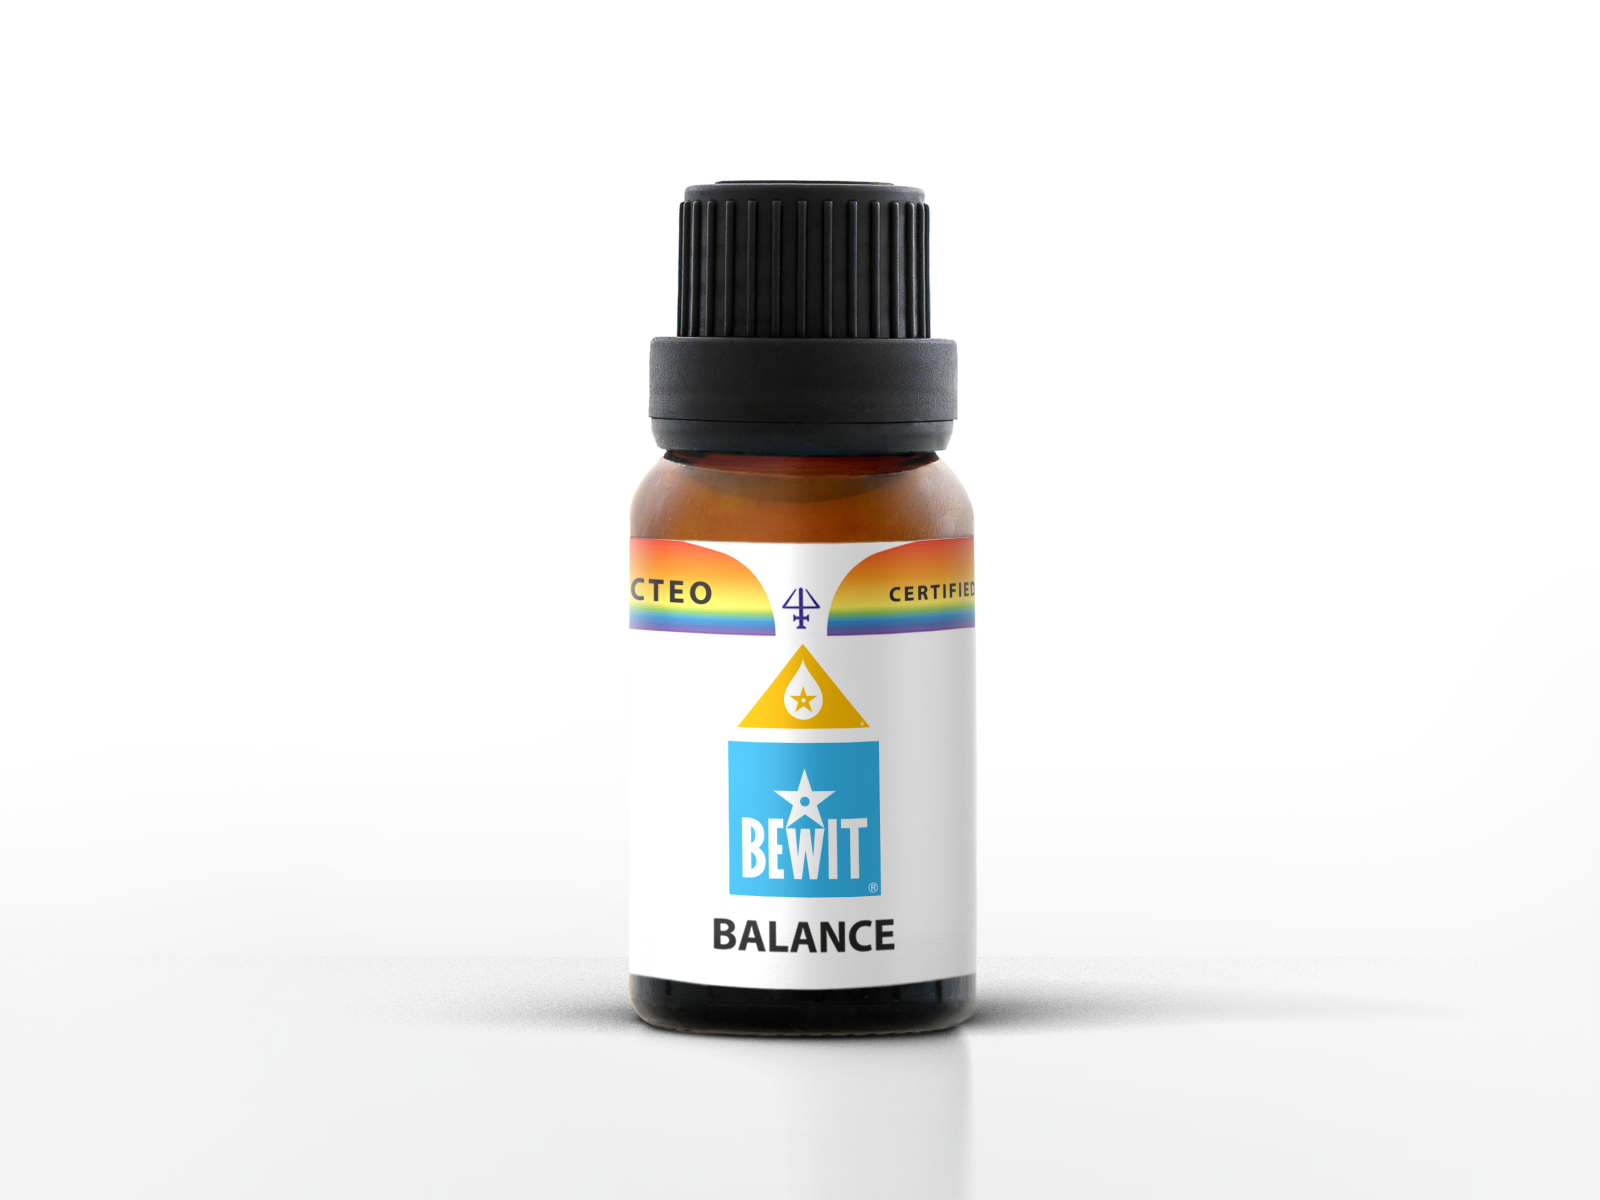 BEWIT BALANCE - This is blend of the essential oils